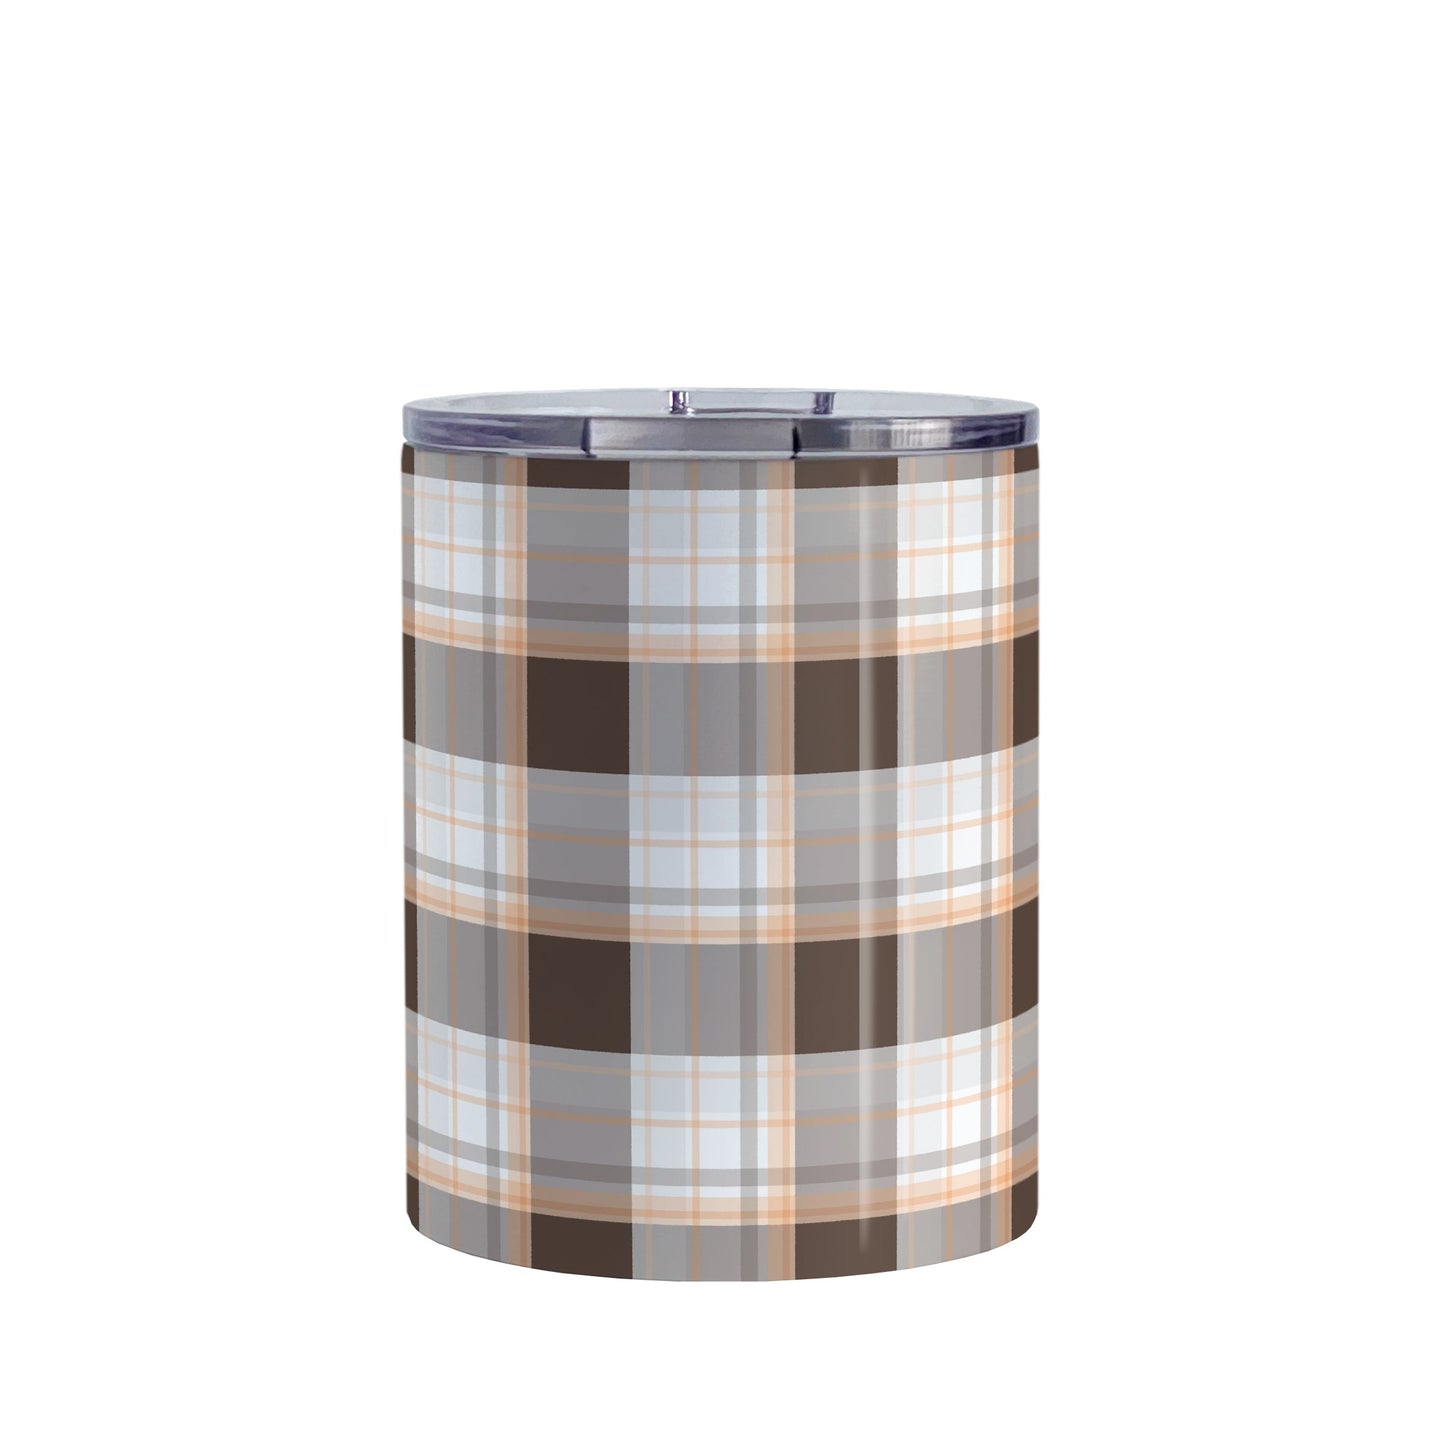 Brown Orange Plaid Tumbler Cup (10oz) at Amy's Coffee Mugs. A stainless steel insulated tumbler cup designed with a brown plaid pattern with orange accents that wraps around the cup. 